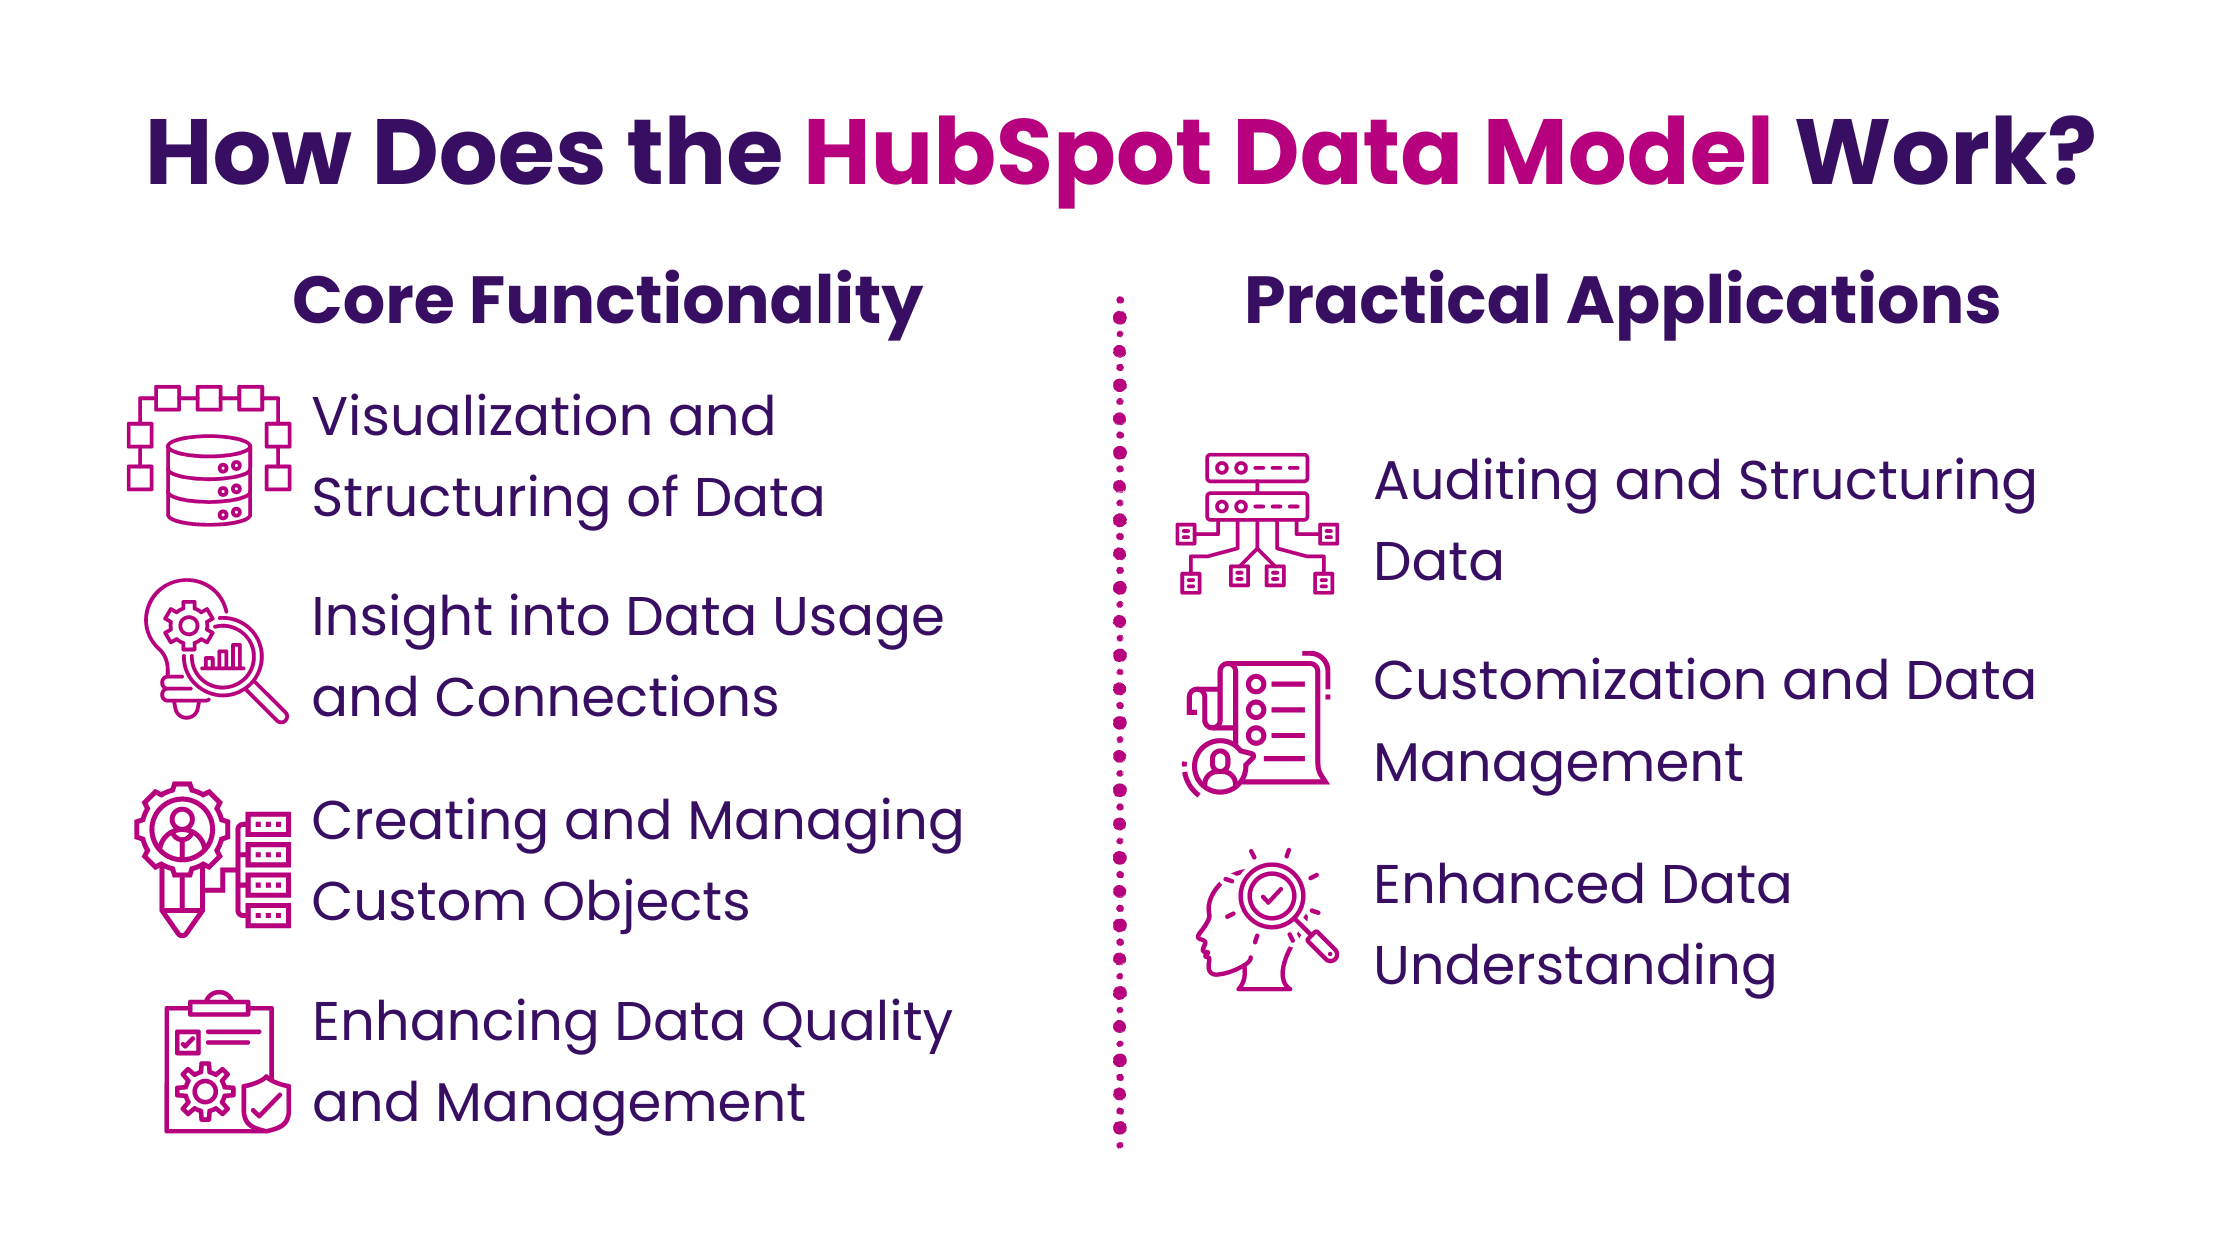 How Does the HubSpot Data Model Work